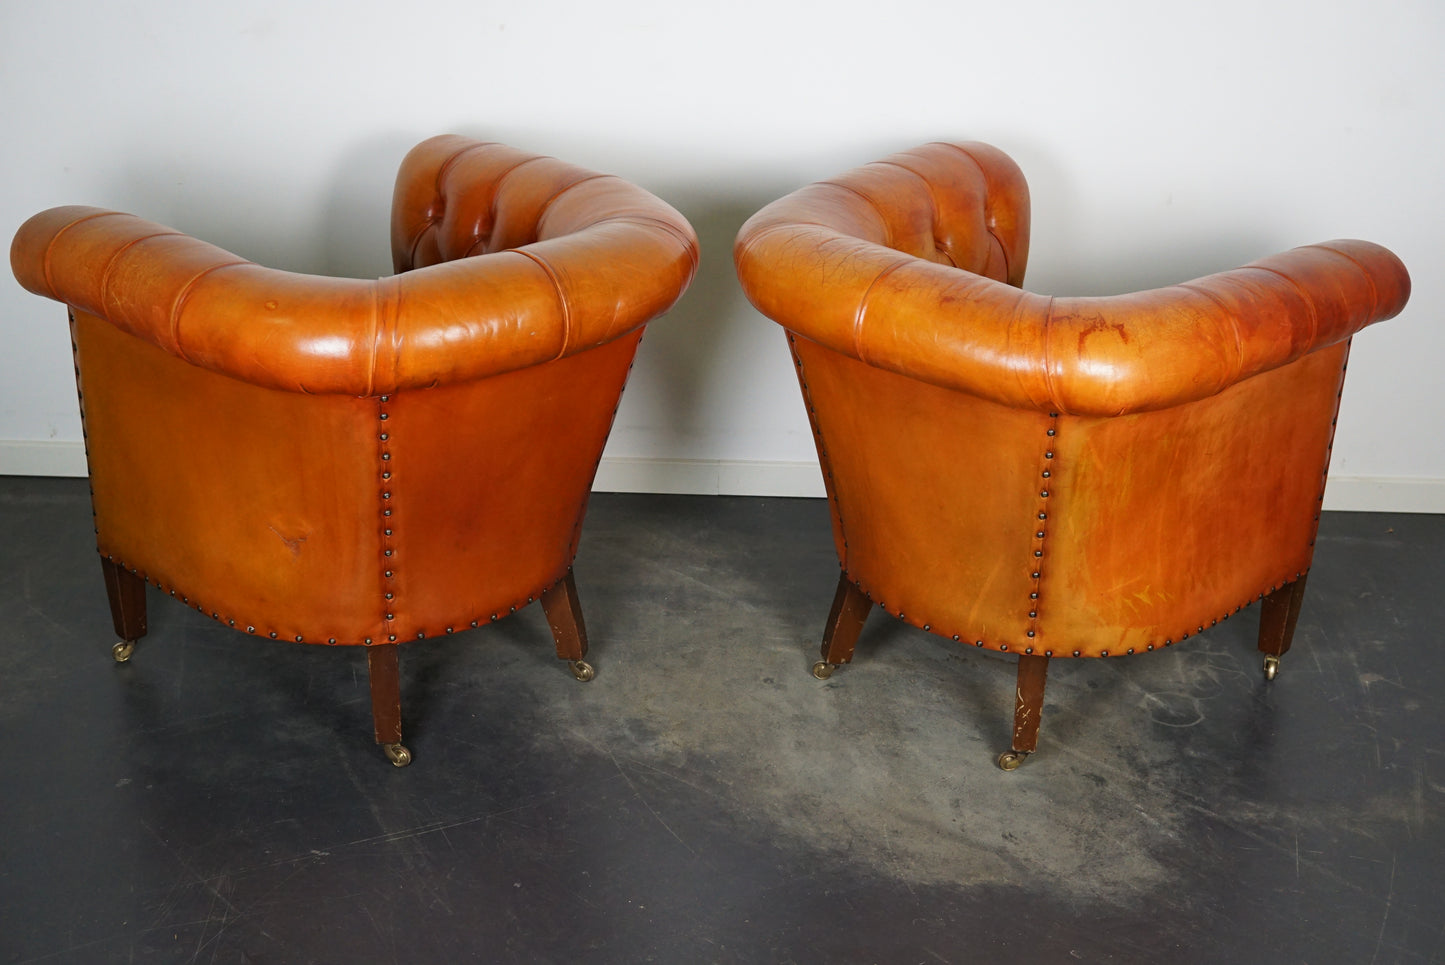 Vintage Dutch Chesterfield Cognac Leather Club Chairs, Set of 2